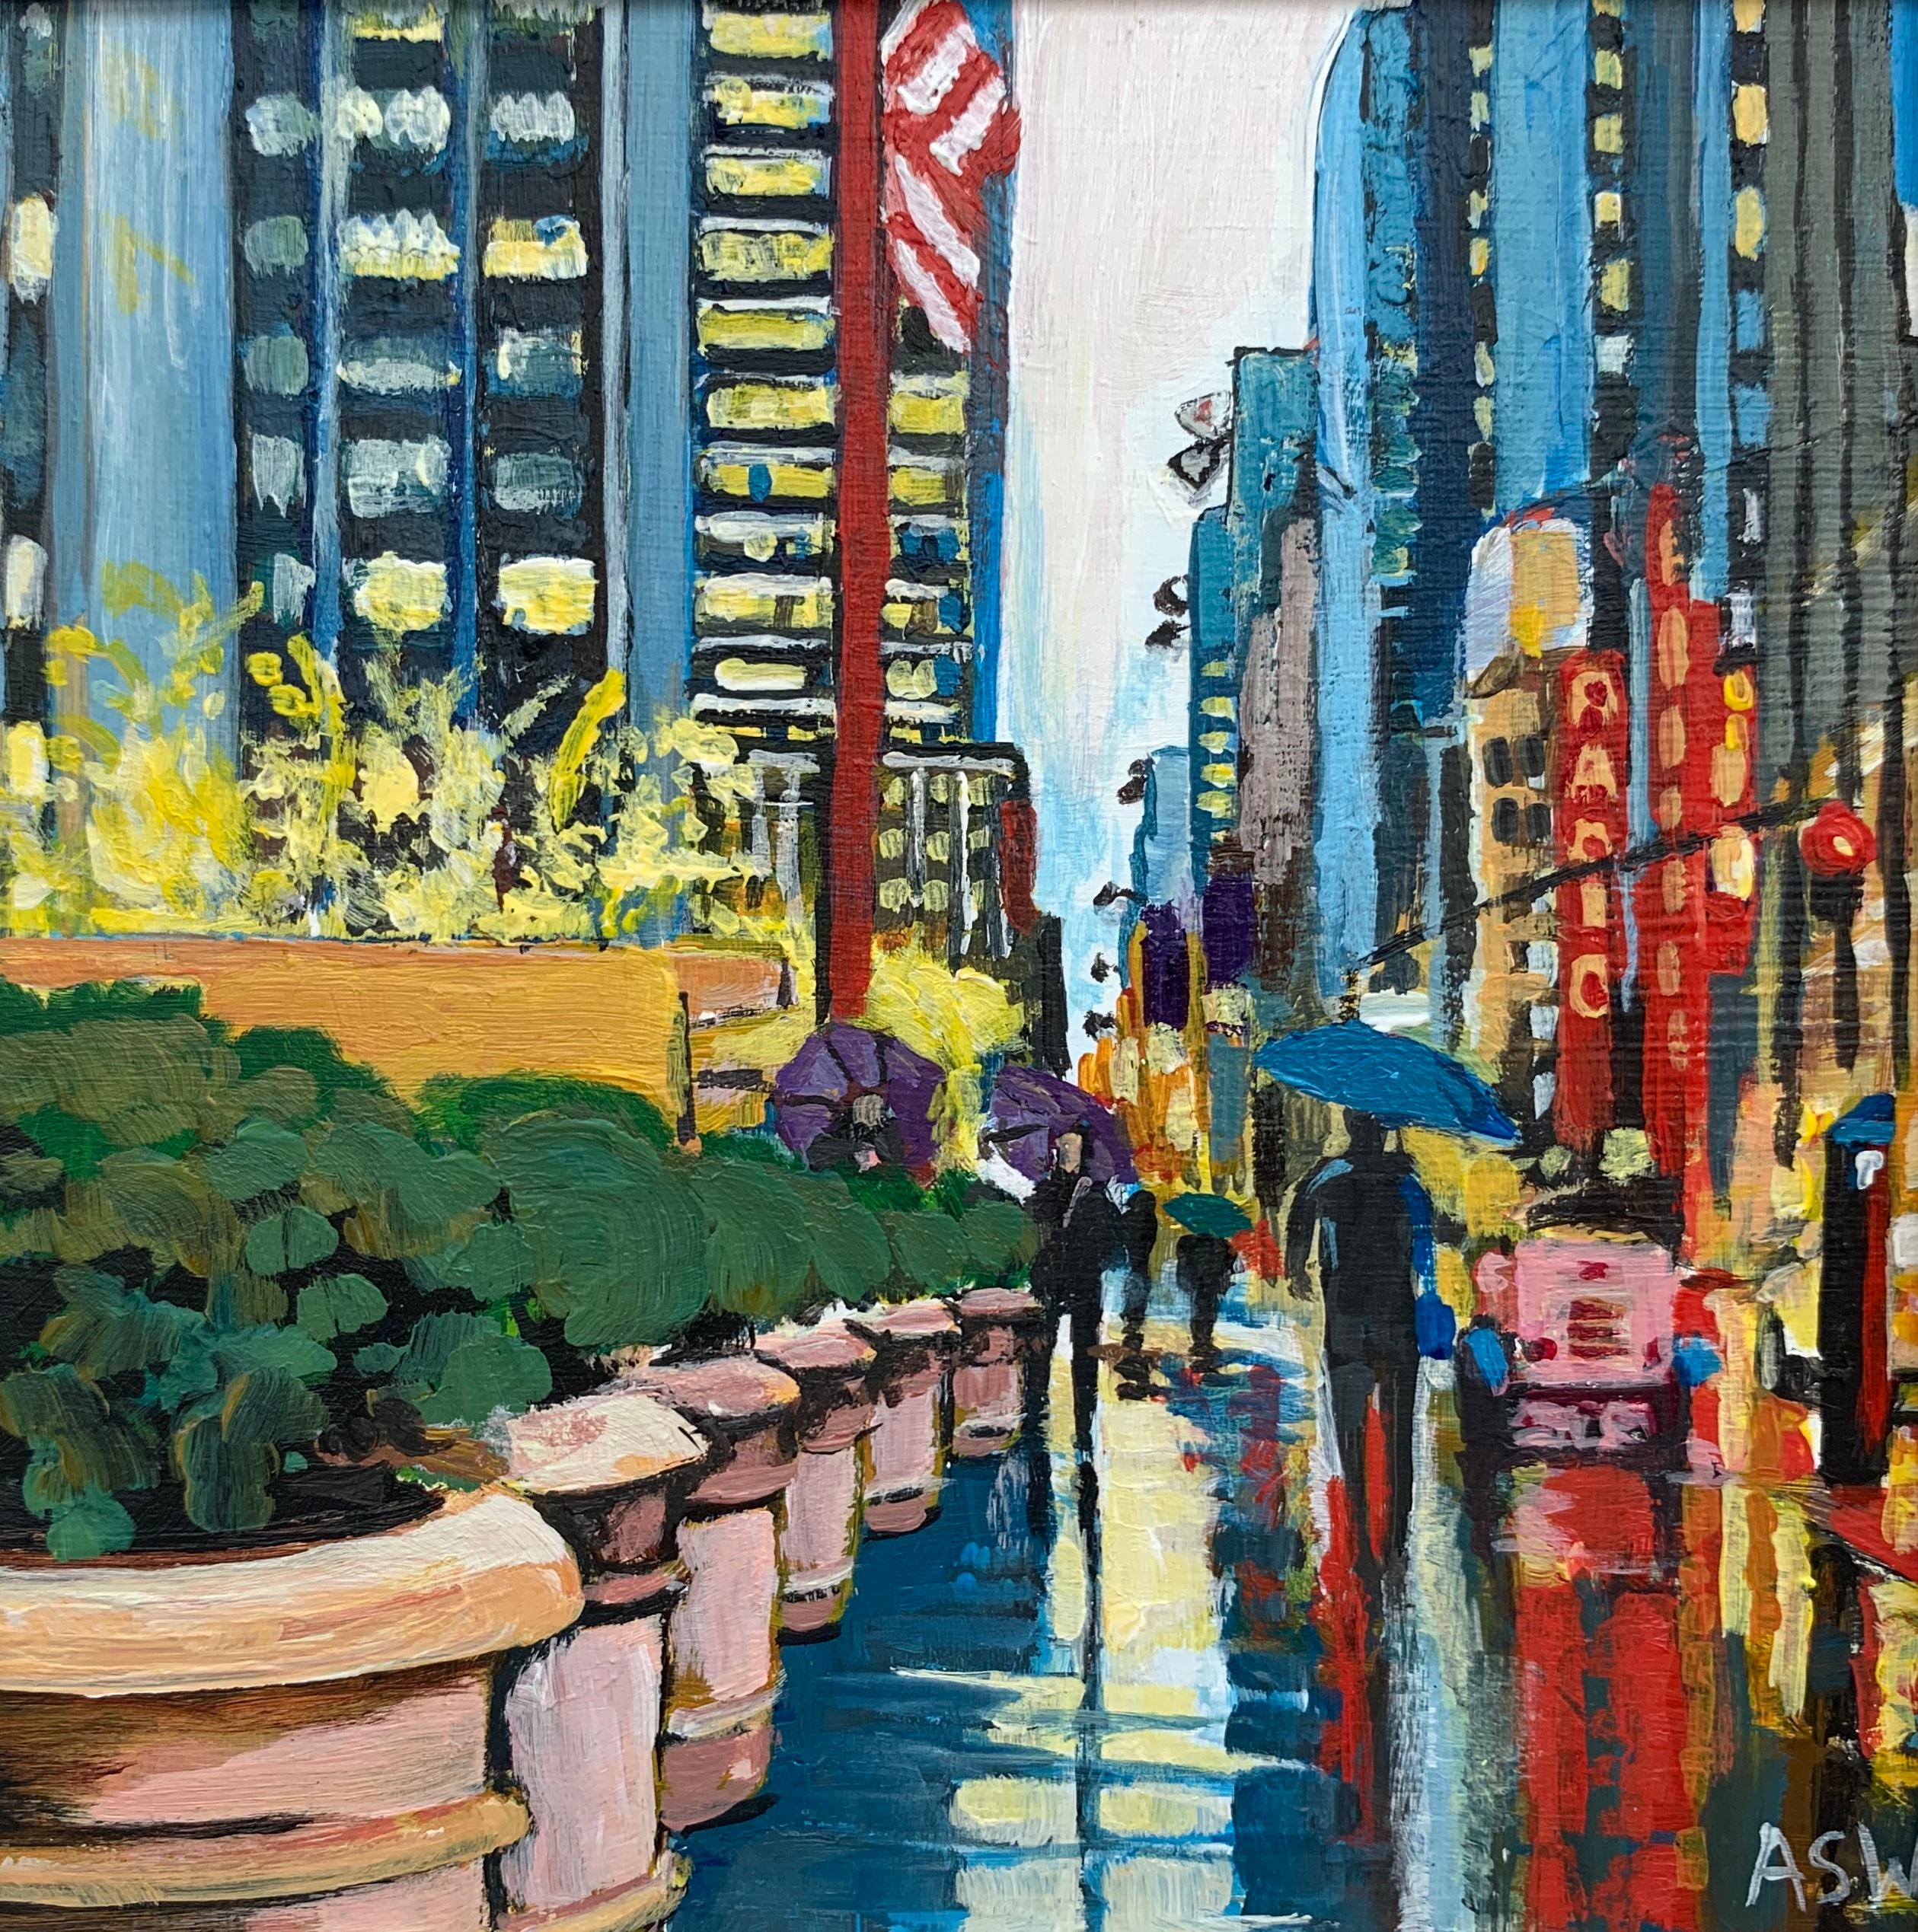 Miniature Painting of Radio City Music Hall, New York City - a unique original from leading British Cityscape Artist, Angela Wakefield.

Art measures 5 x 5 inches
Frame measures 9 x 9 inches

Angela Wakefield has twice been on the front cover of